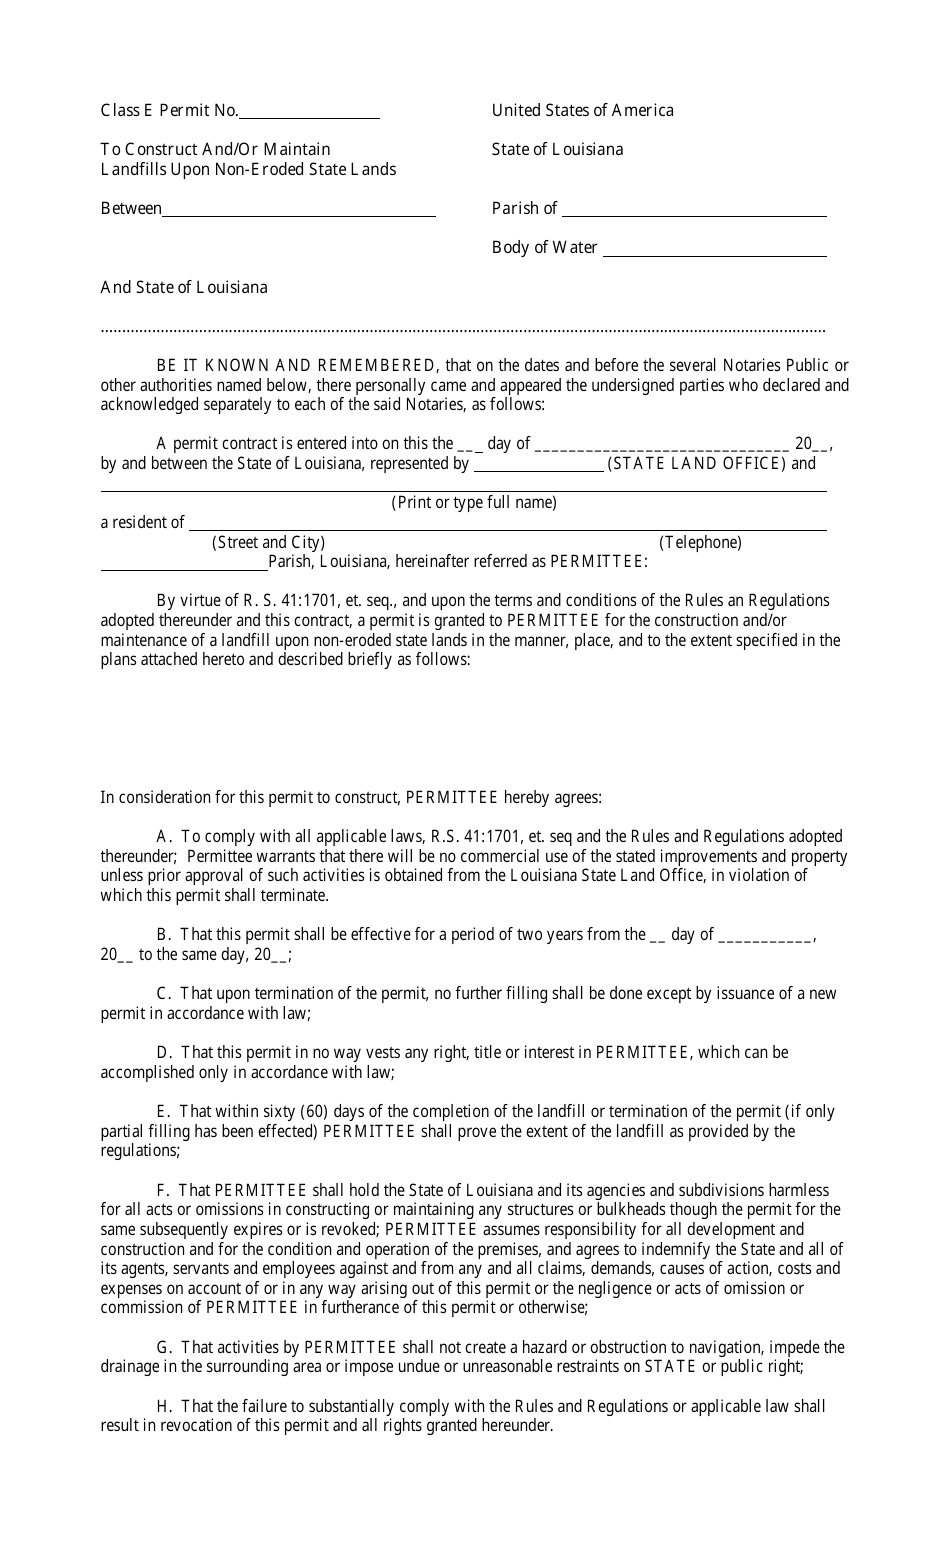 Class E Permit to Construct and / or Maintain Landfills Upon Non-eroded State Lands - Louisiana, Page 1